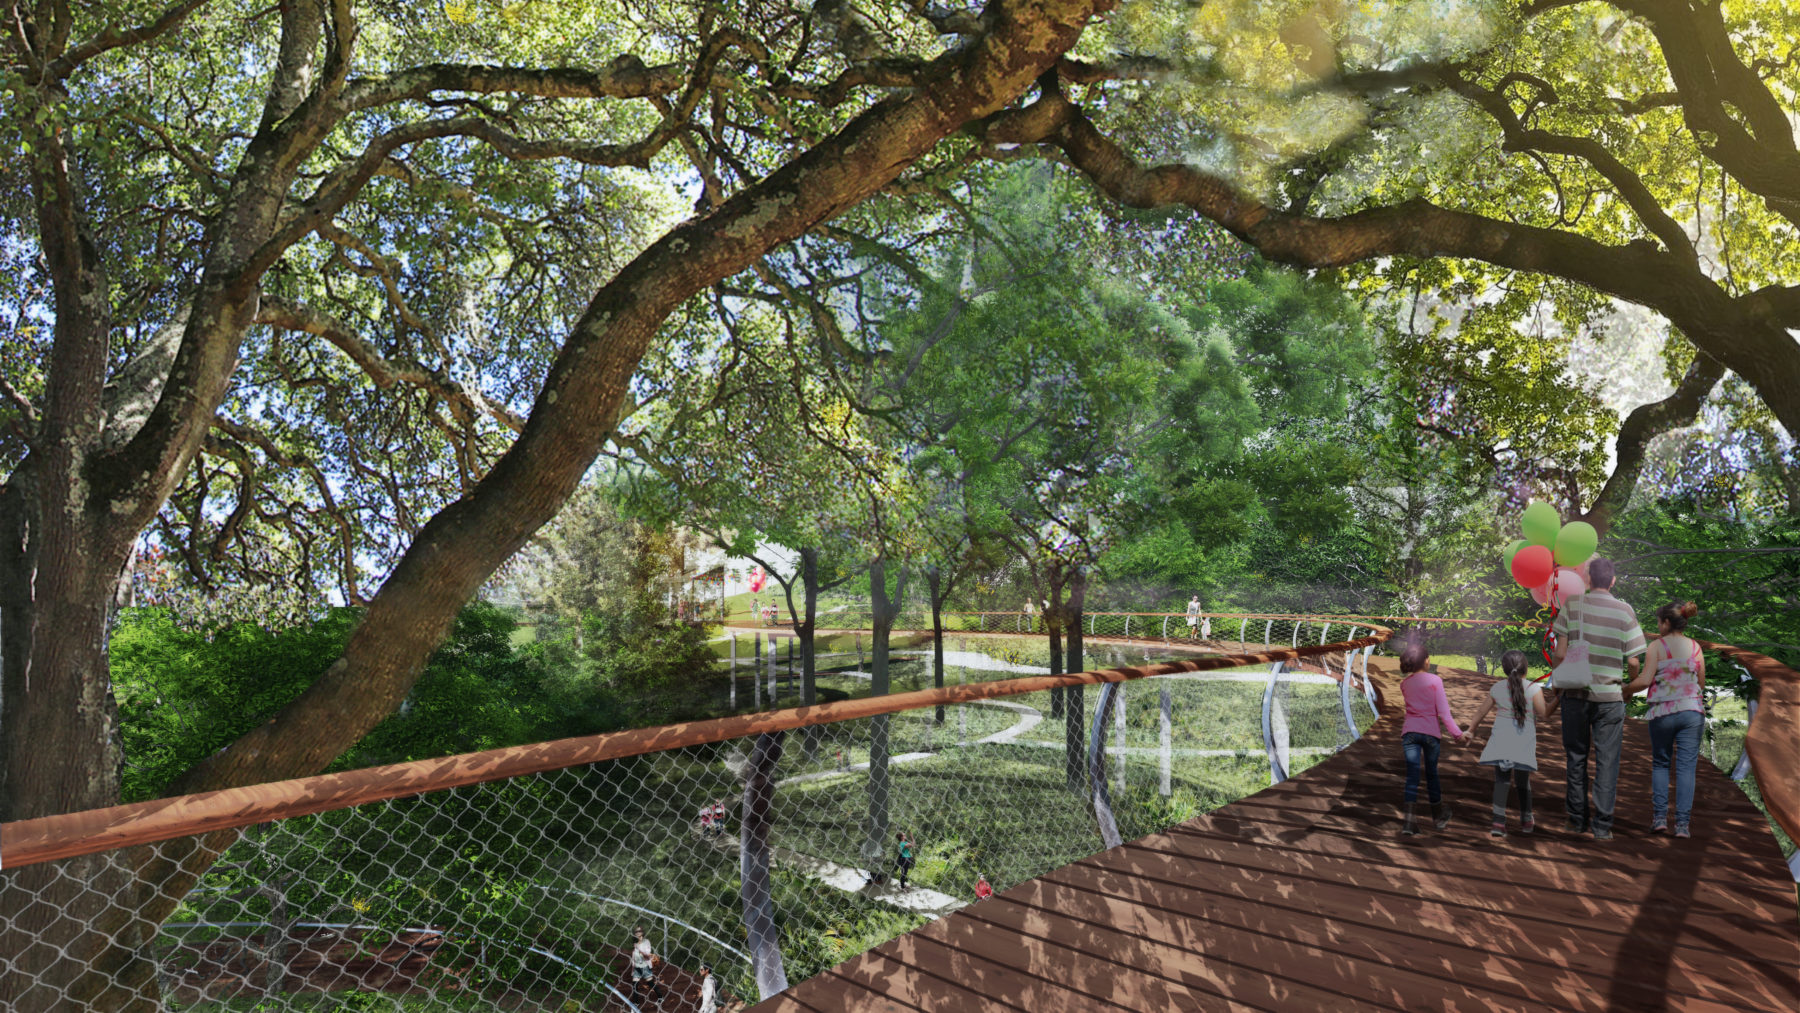 Rendering of densely shaded grove of live oak trees